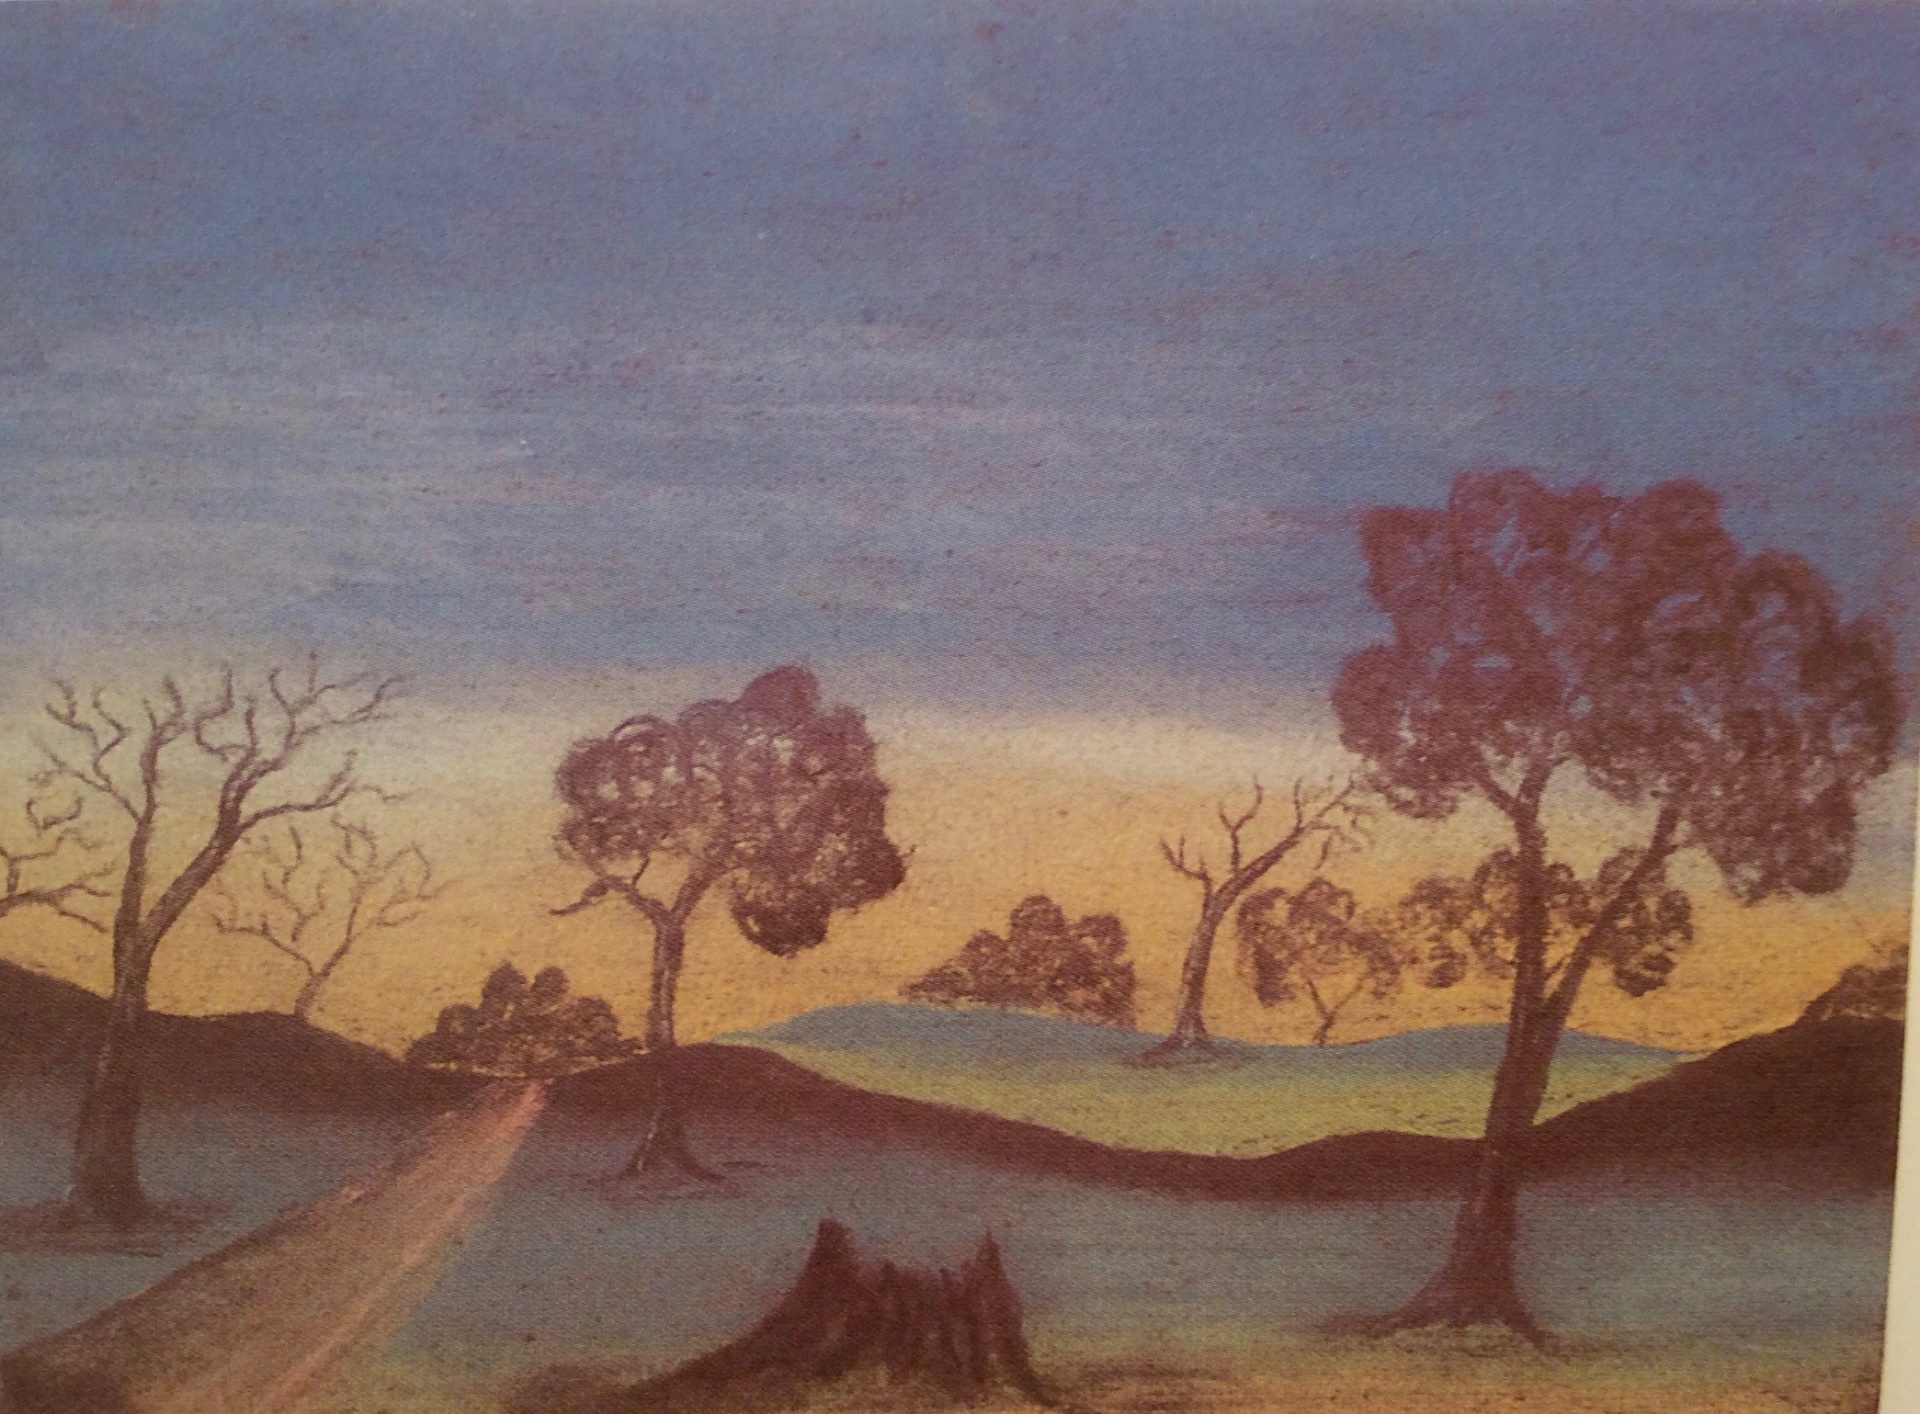 Landscape by Claude Kelly, pastel on paper, 18 x 25cm, c.1948. Stan, Melvie and Gael Phillips Collection, 1947 - 65, Berndt Museum of Anthropology.